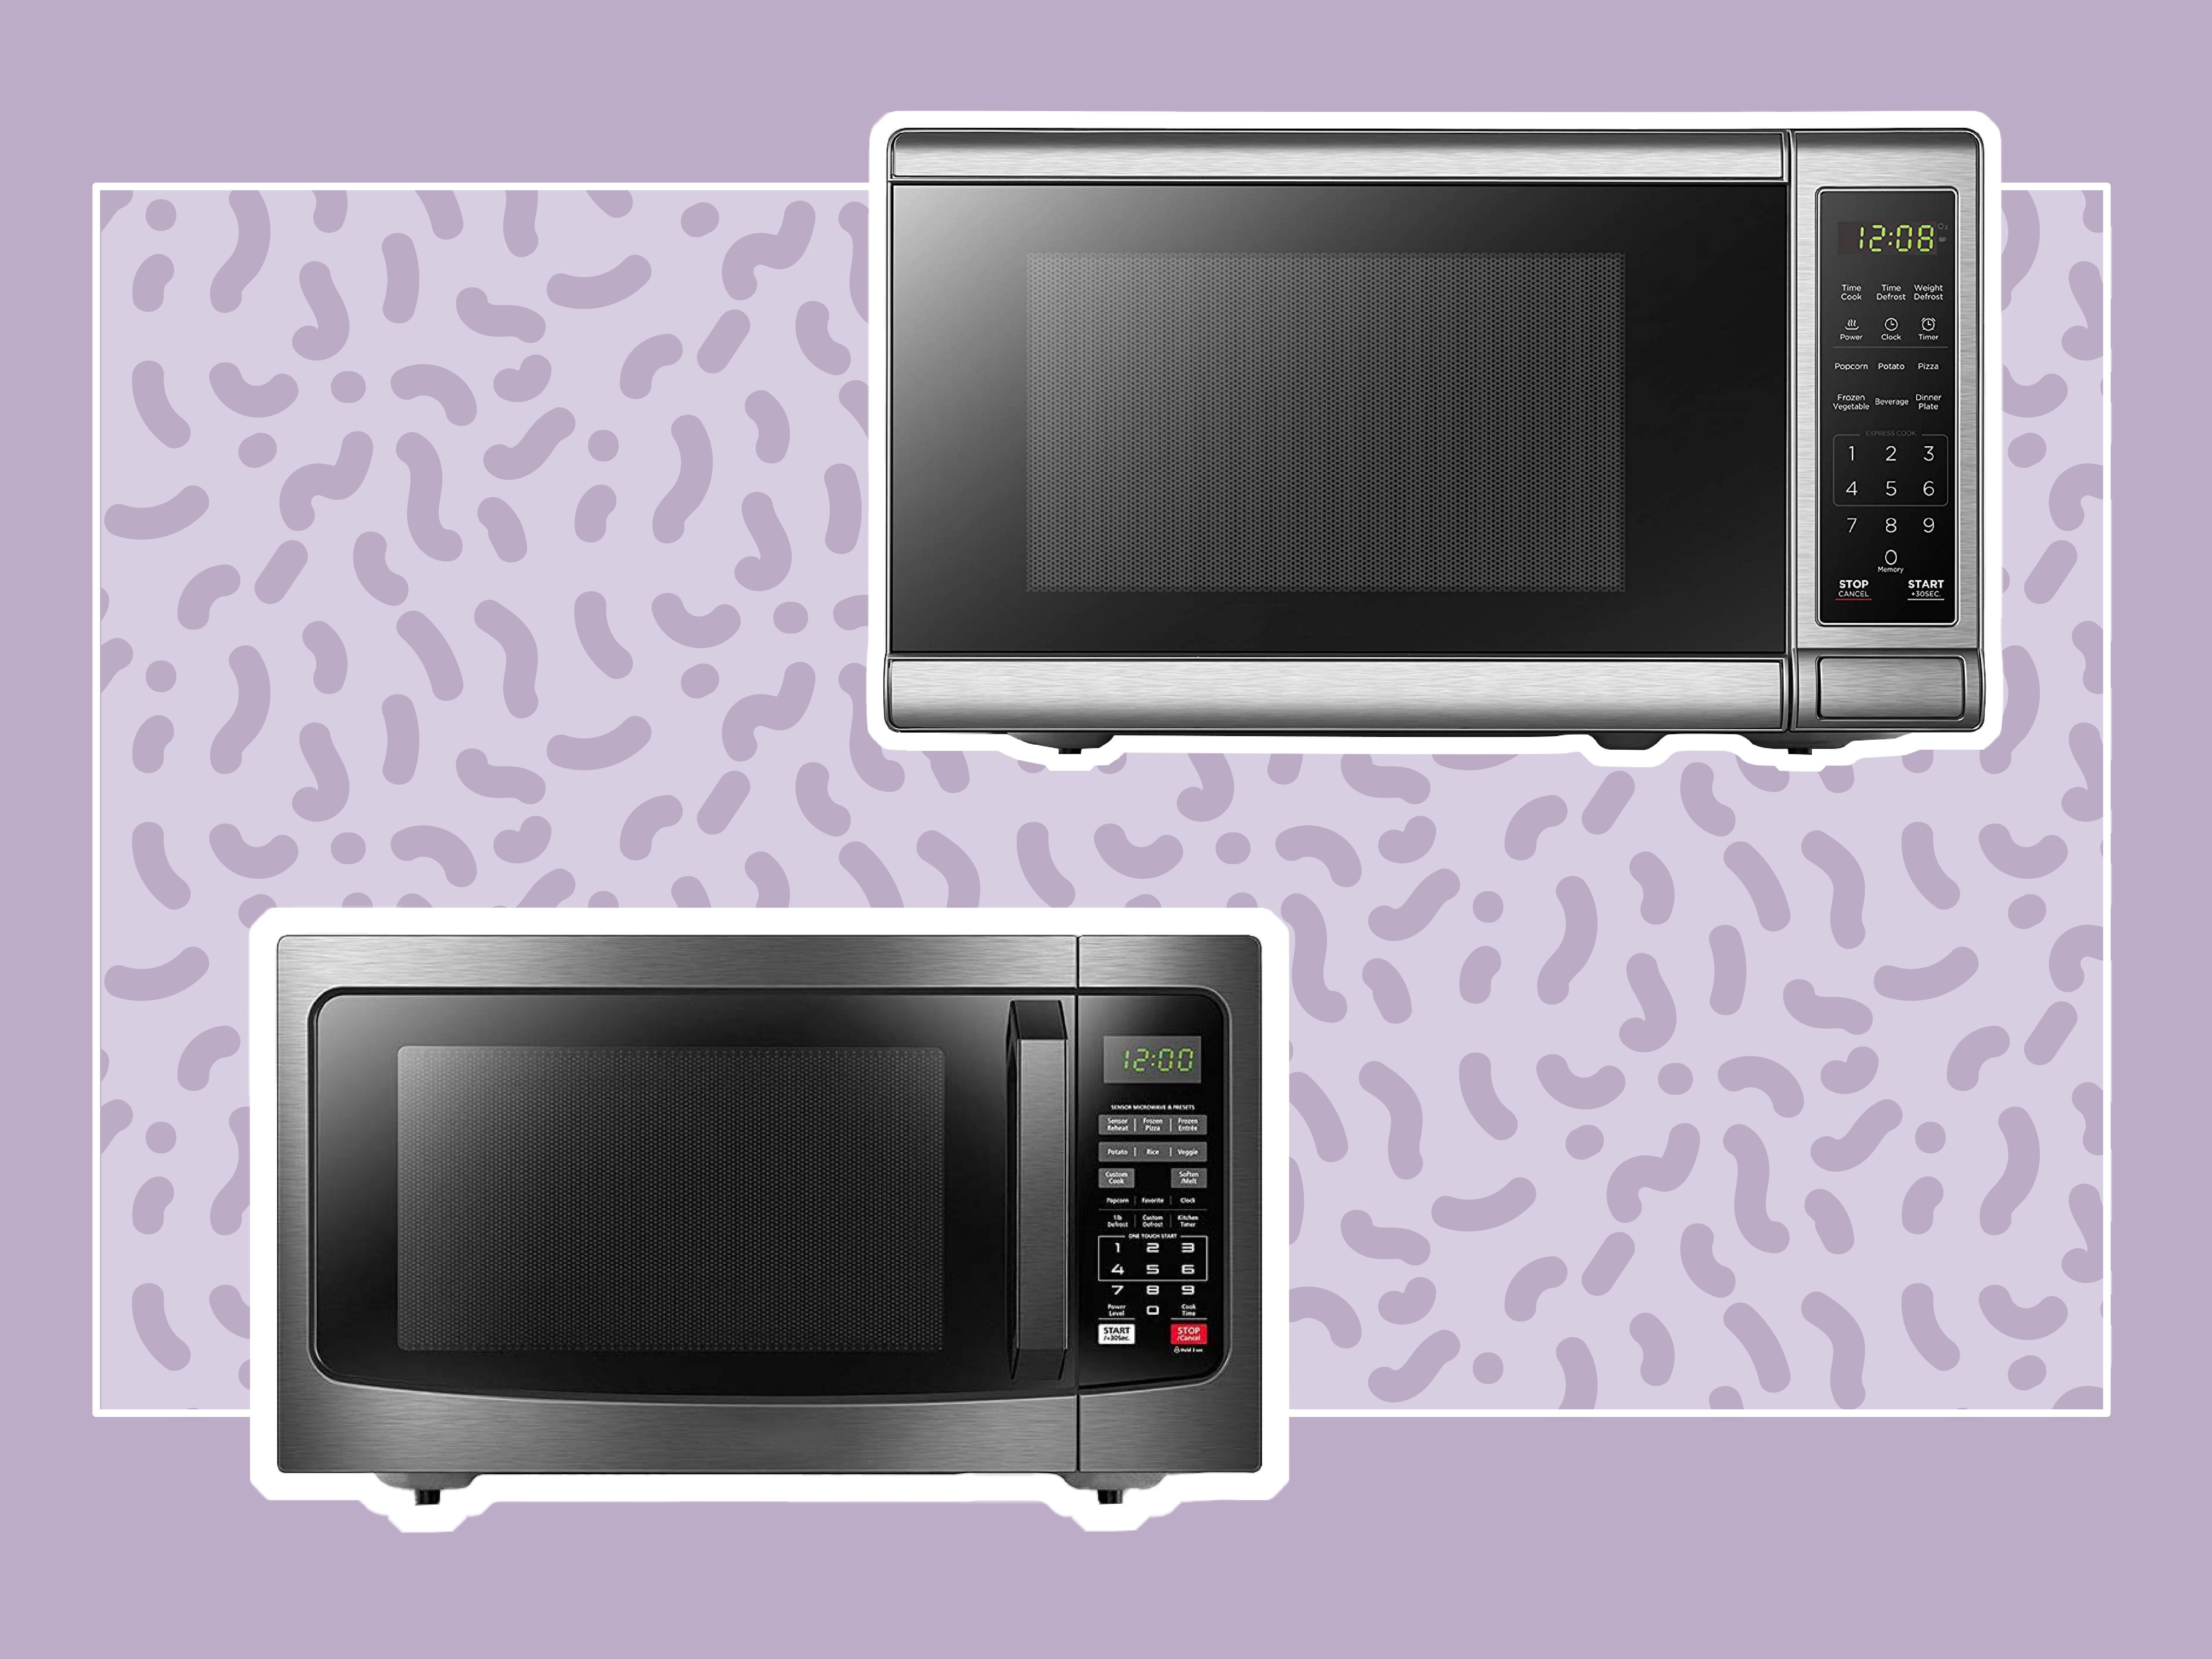 Detail Images Of Microwave Oven Nomer 31